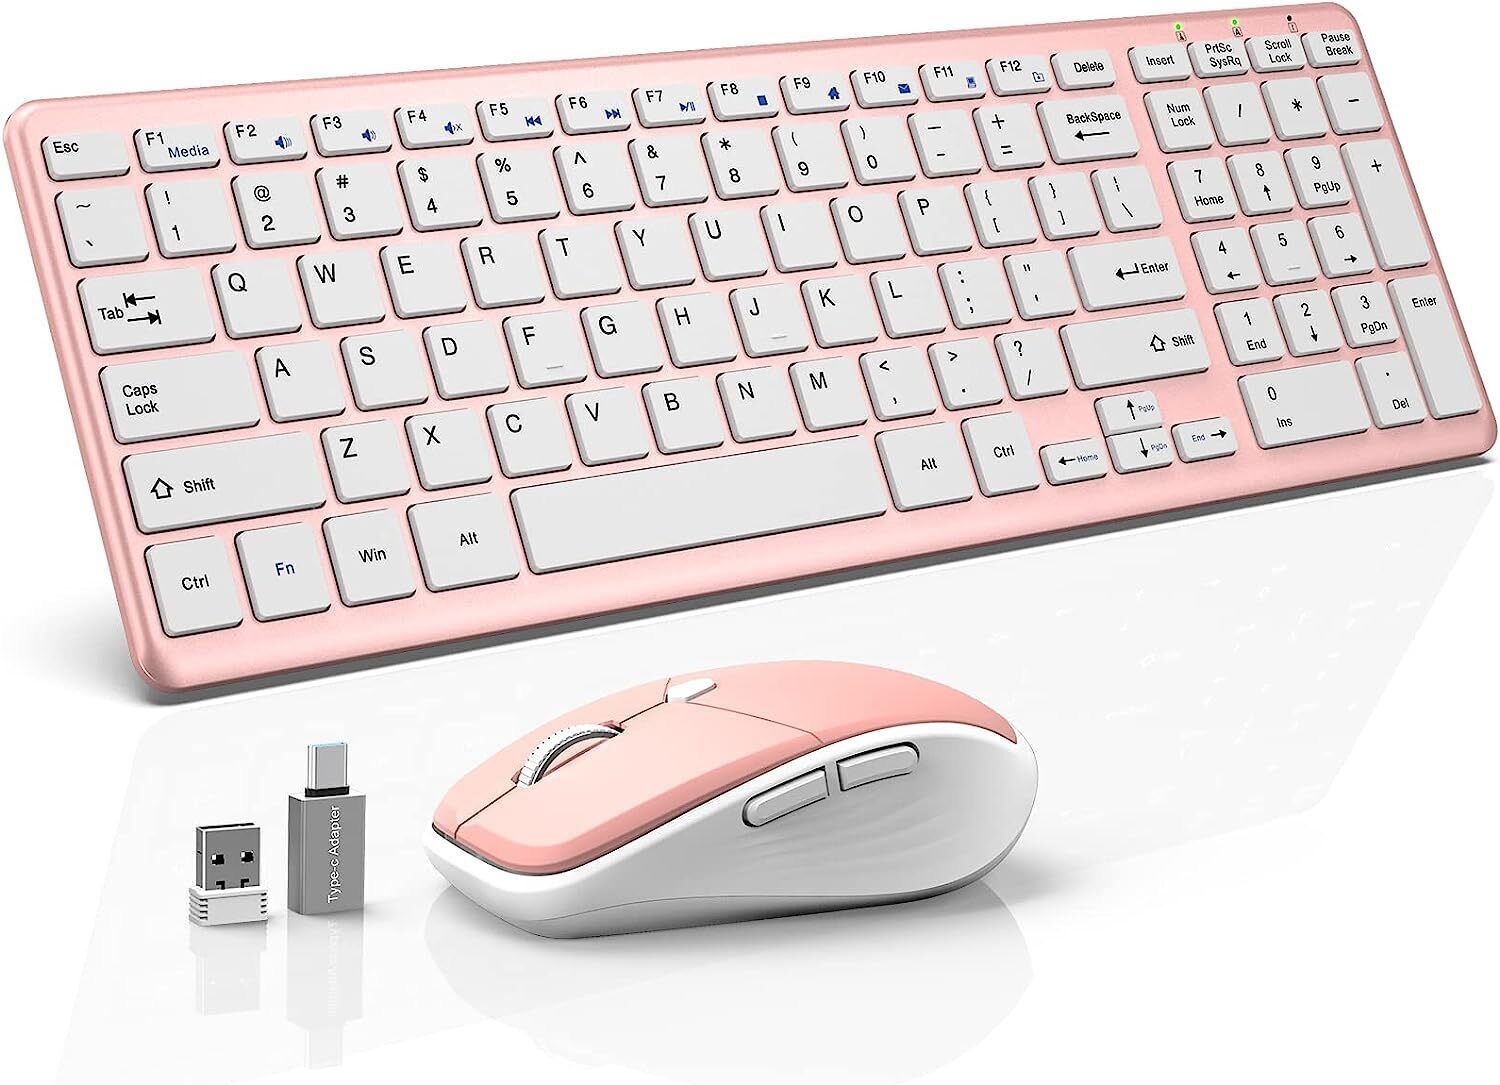 wireless keyboard and mouse combo, 2.4ghz slim full size quiet wireless keyboard mouse combo with 19 shortcut keys and number pad for windows, mac os,